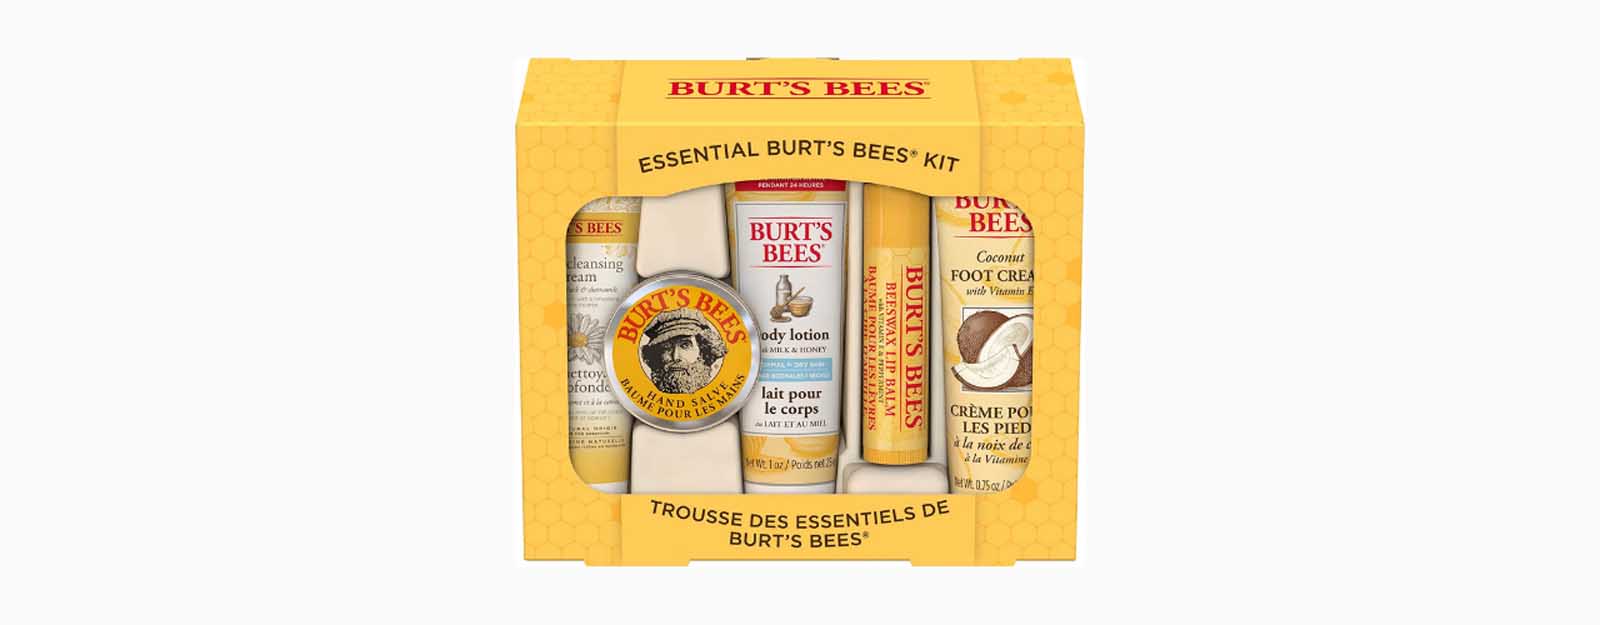 cruise packing list burts bees